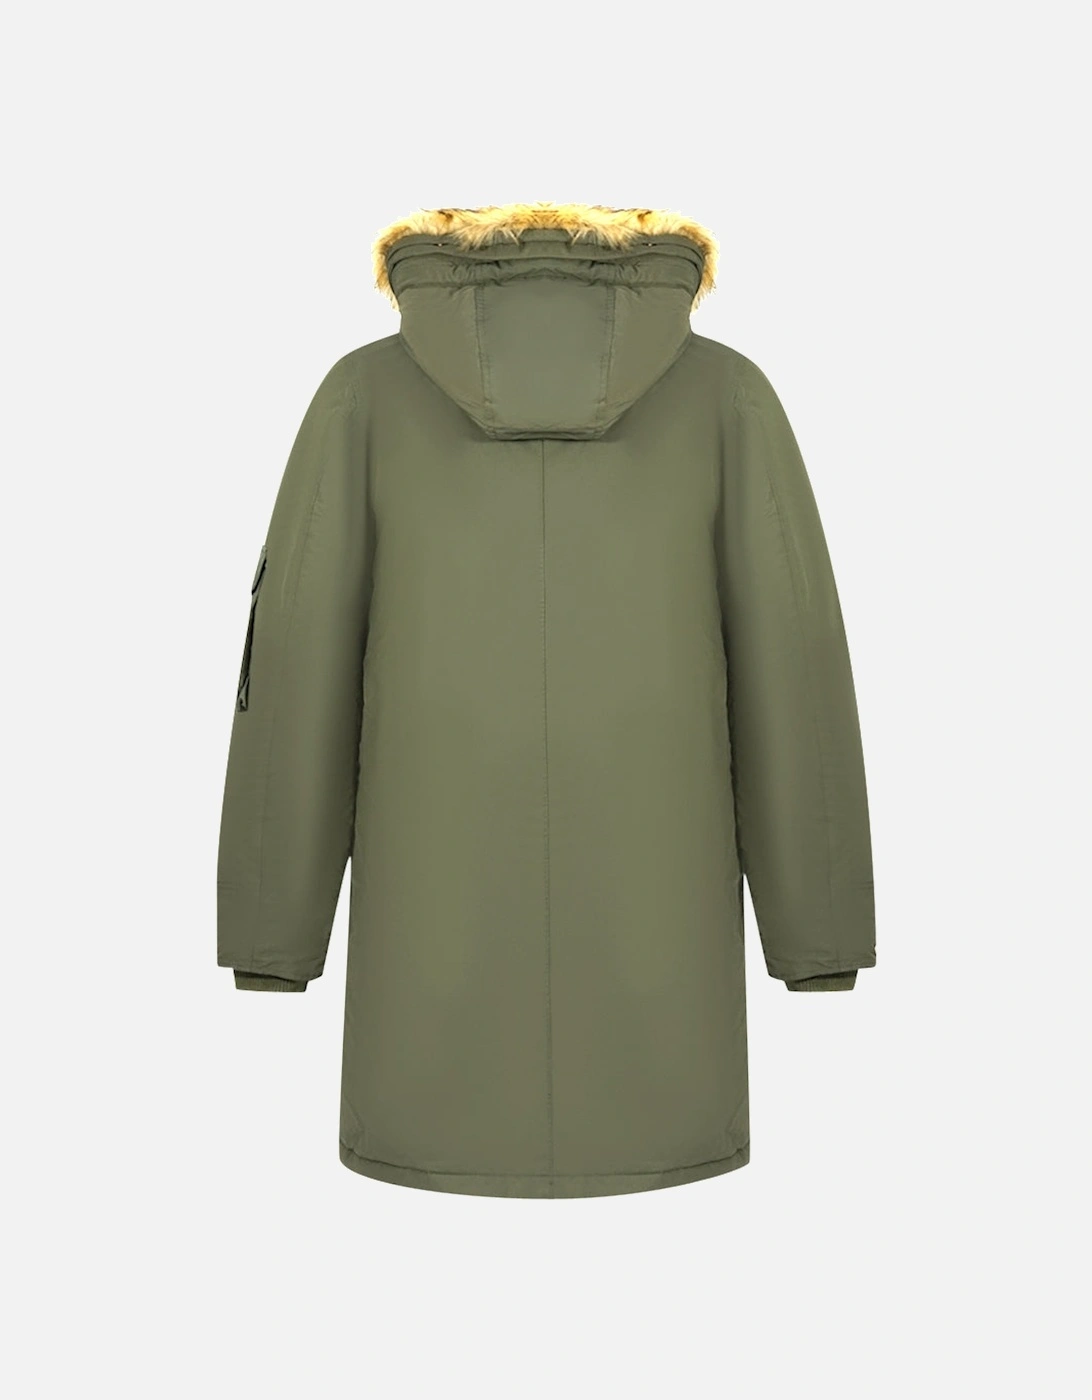 W-Colby-21 Green Hooded Parka Jacket